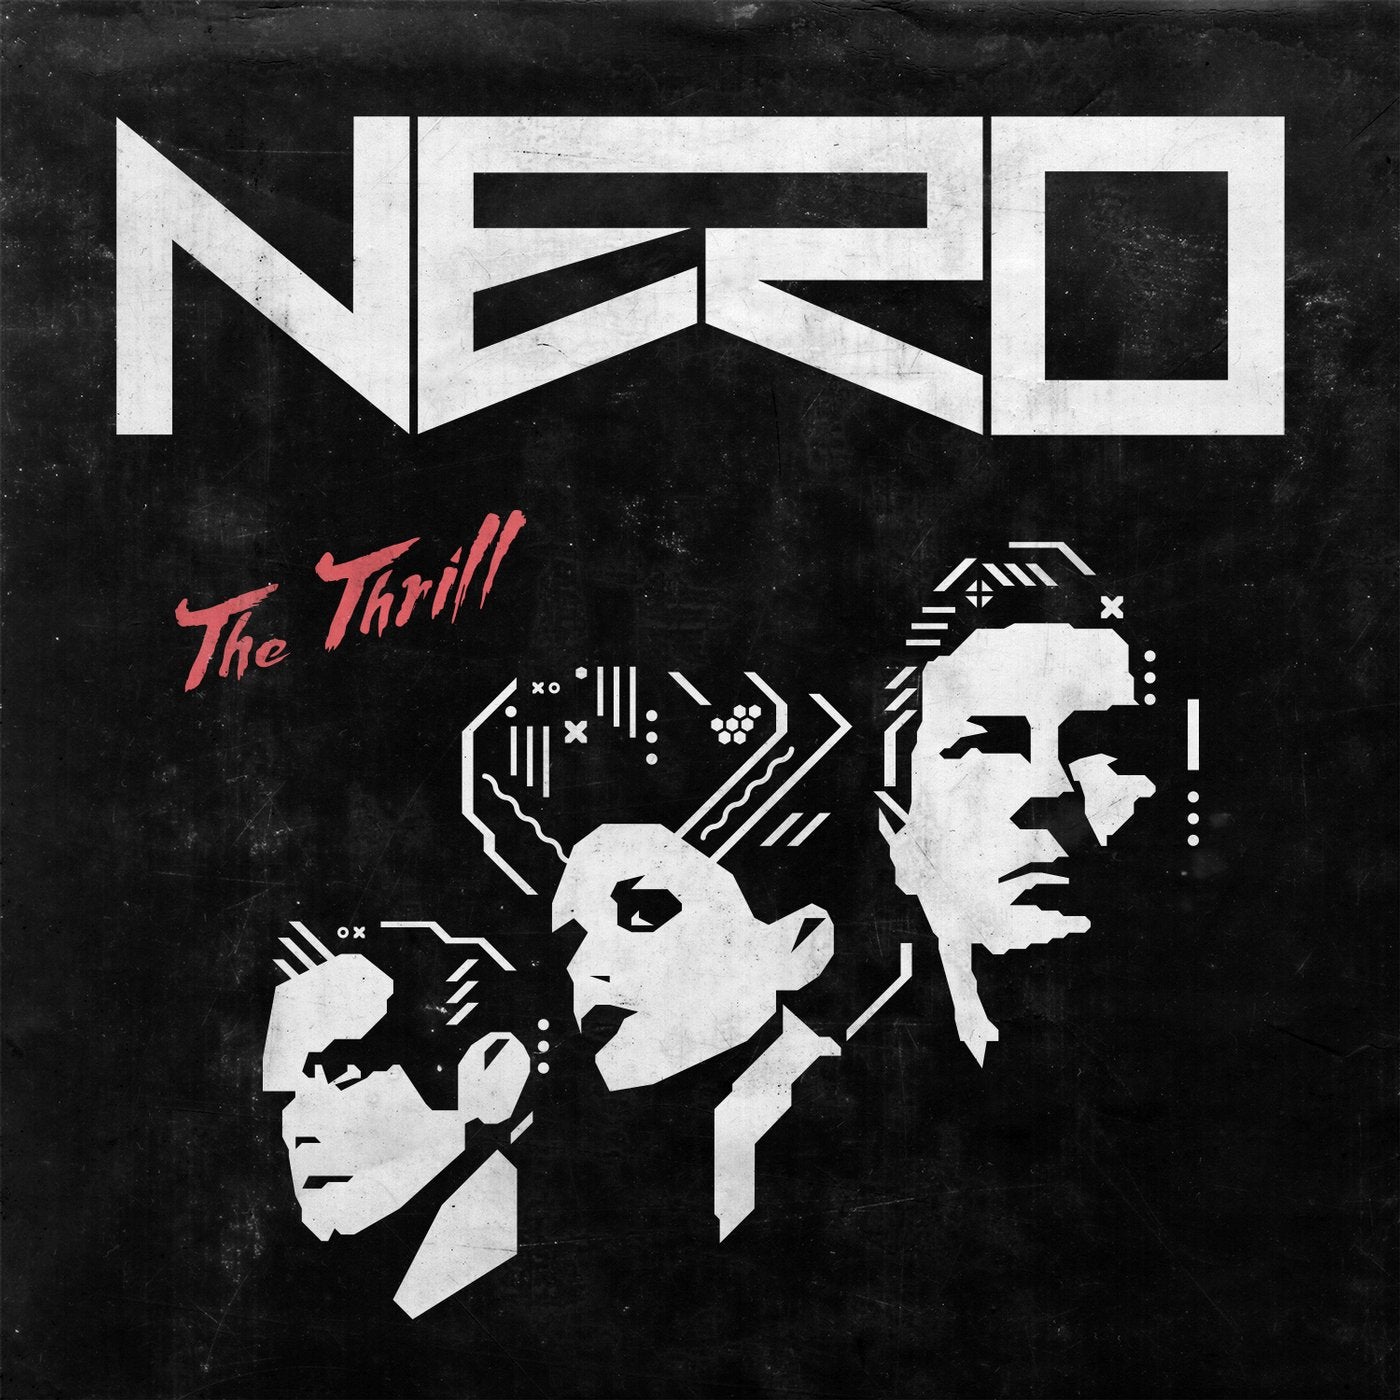 The Thrill (Remixes)